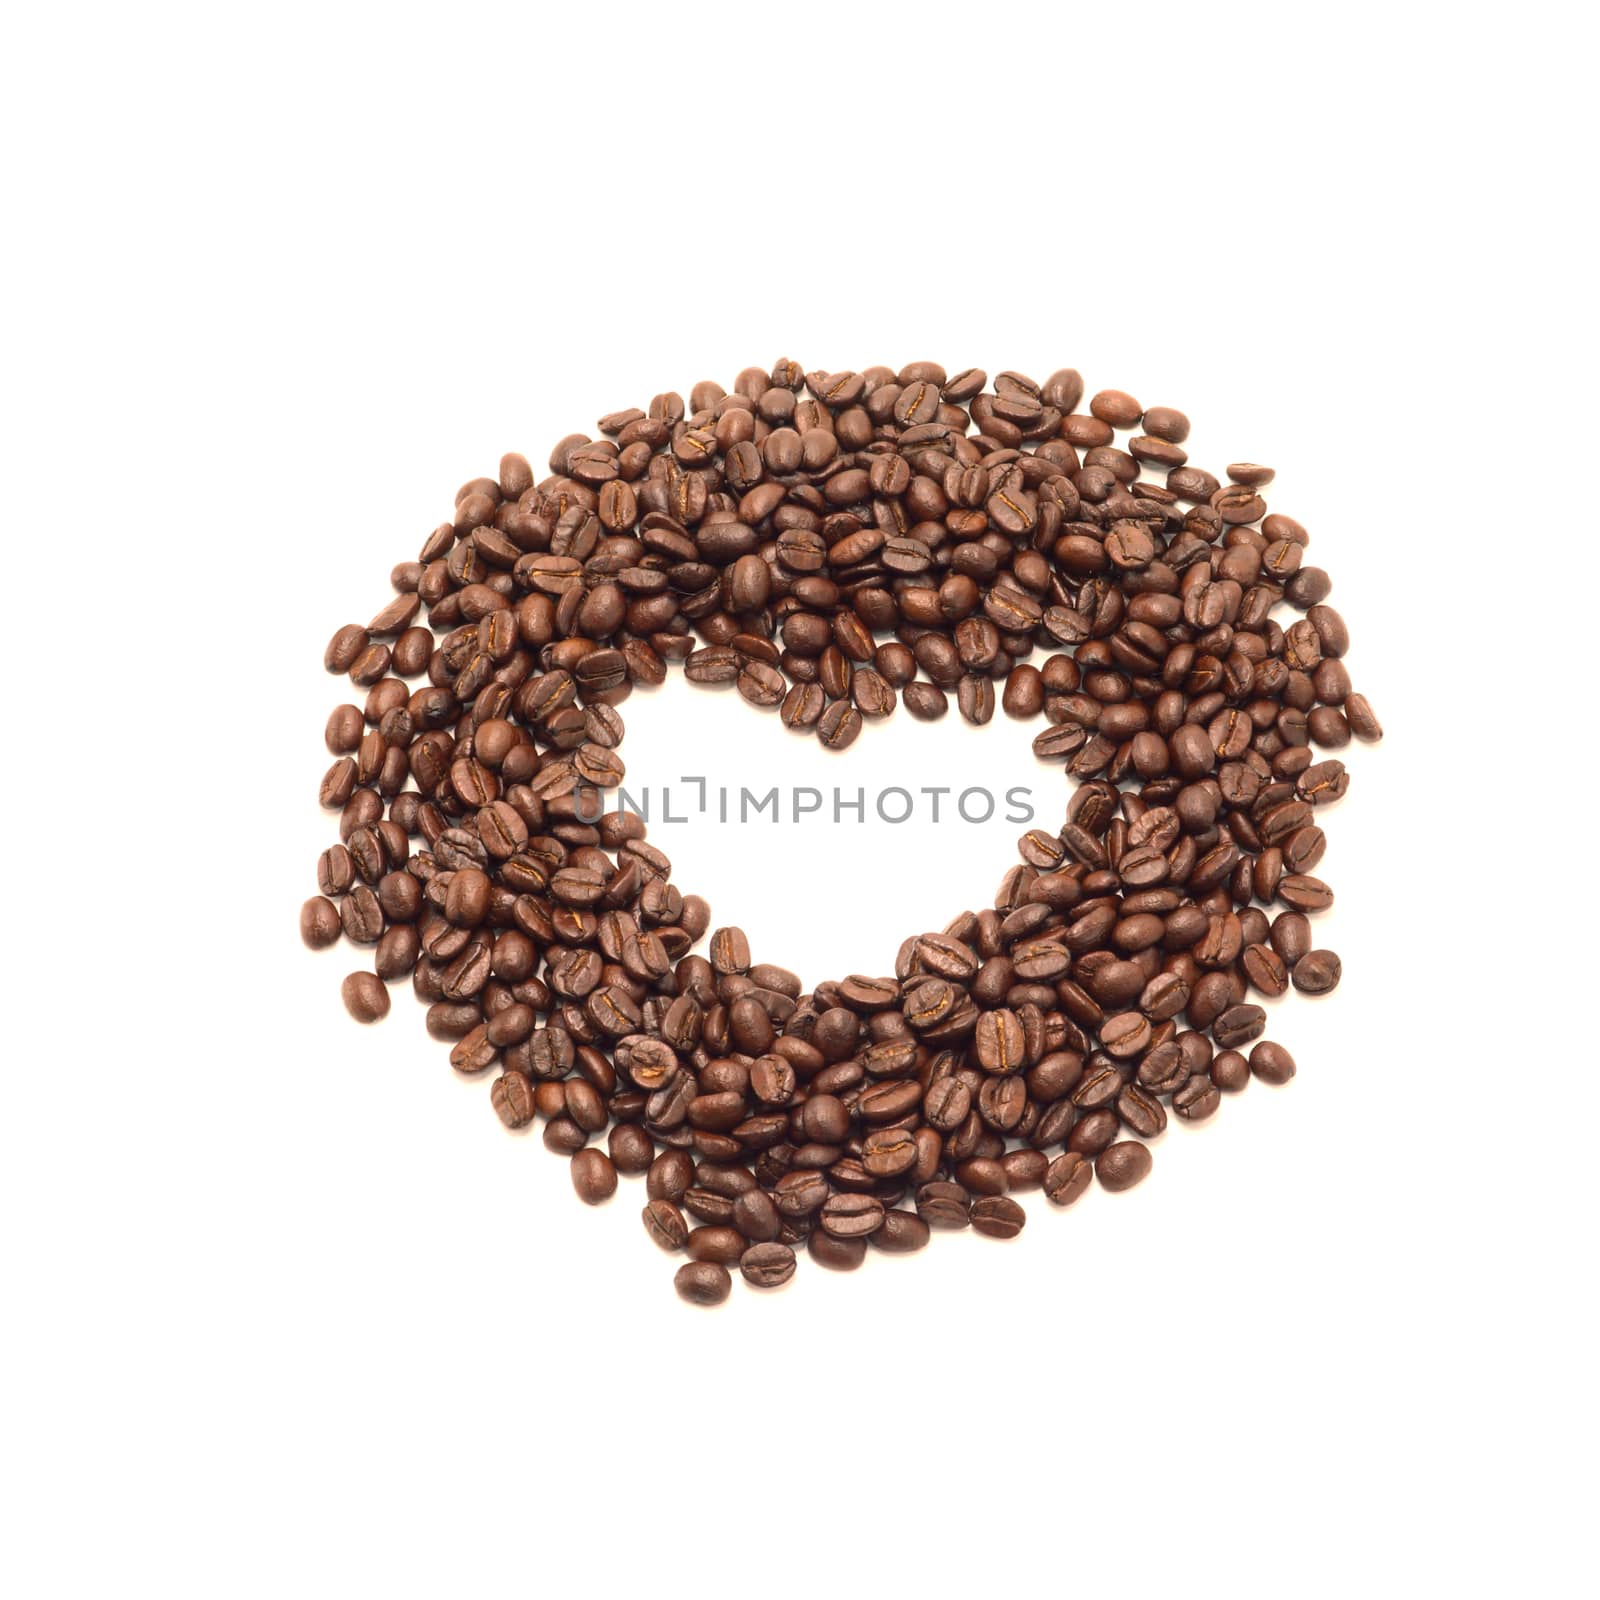 Coffee beans on the white background. by Noppharat_th